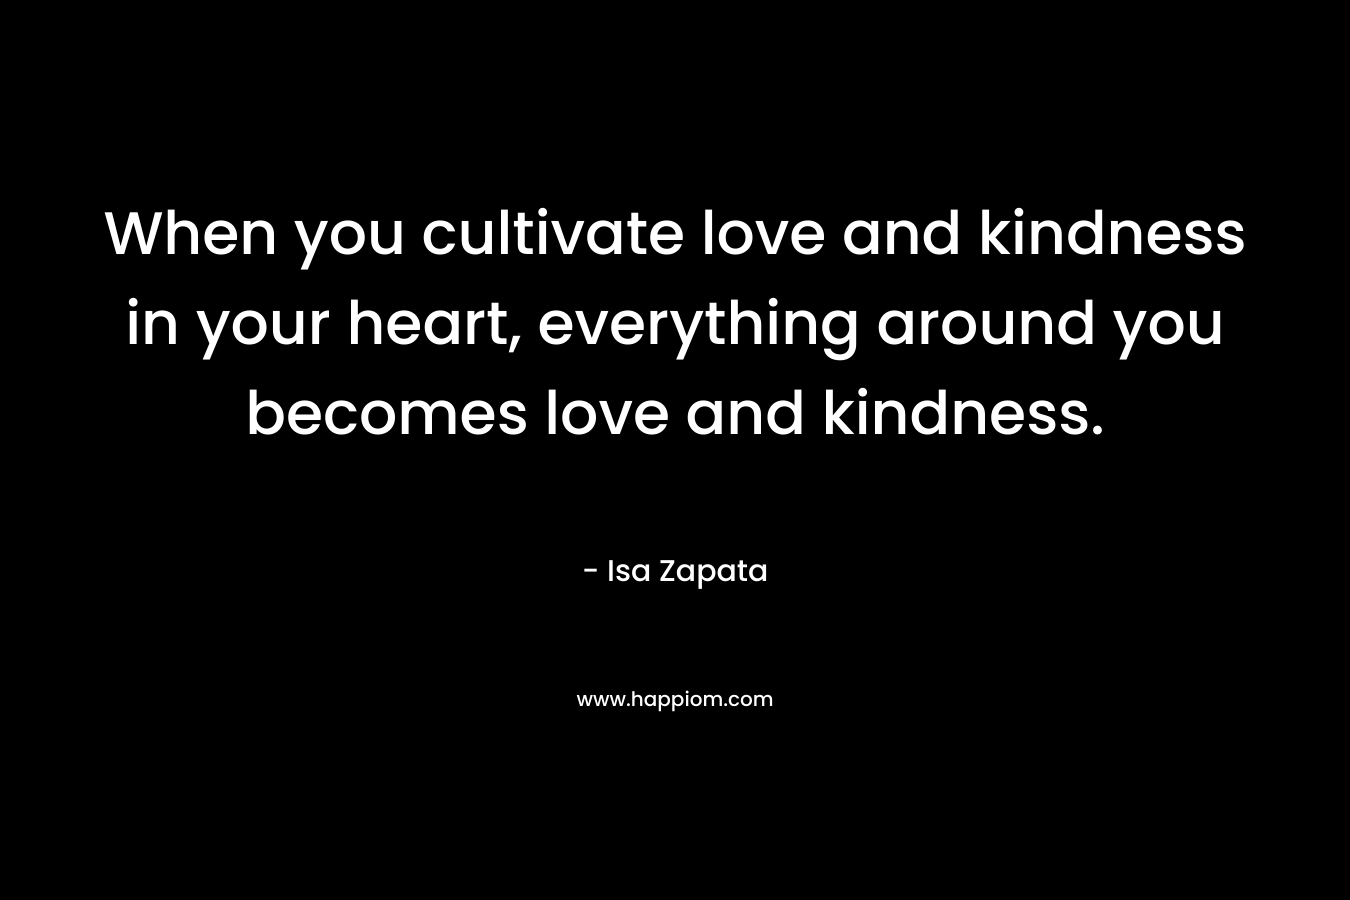 When you cultivate love and kindness in your heart, everything around you becomes love and kindness.